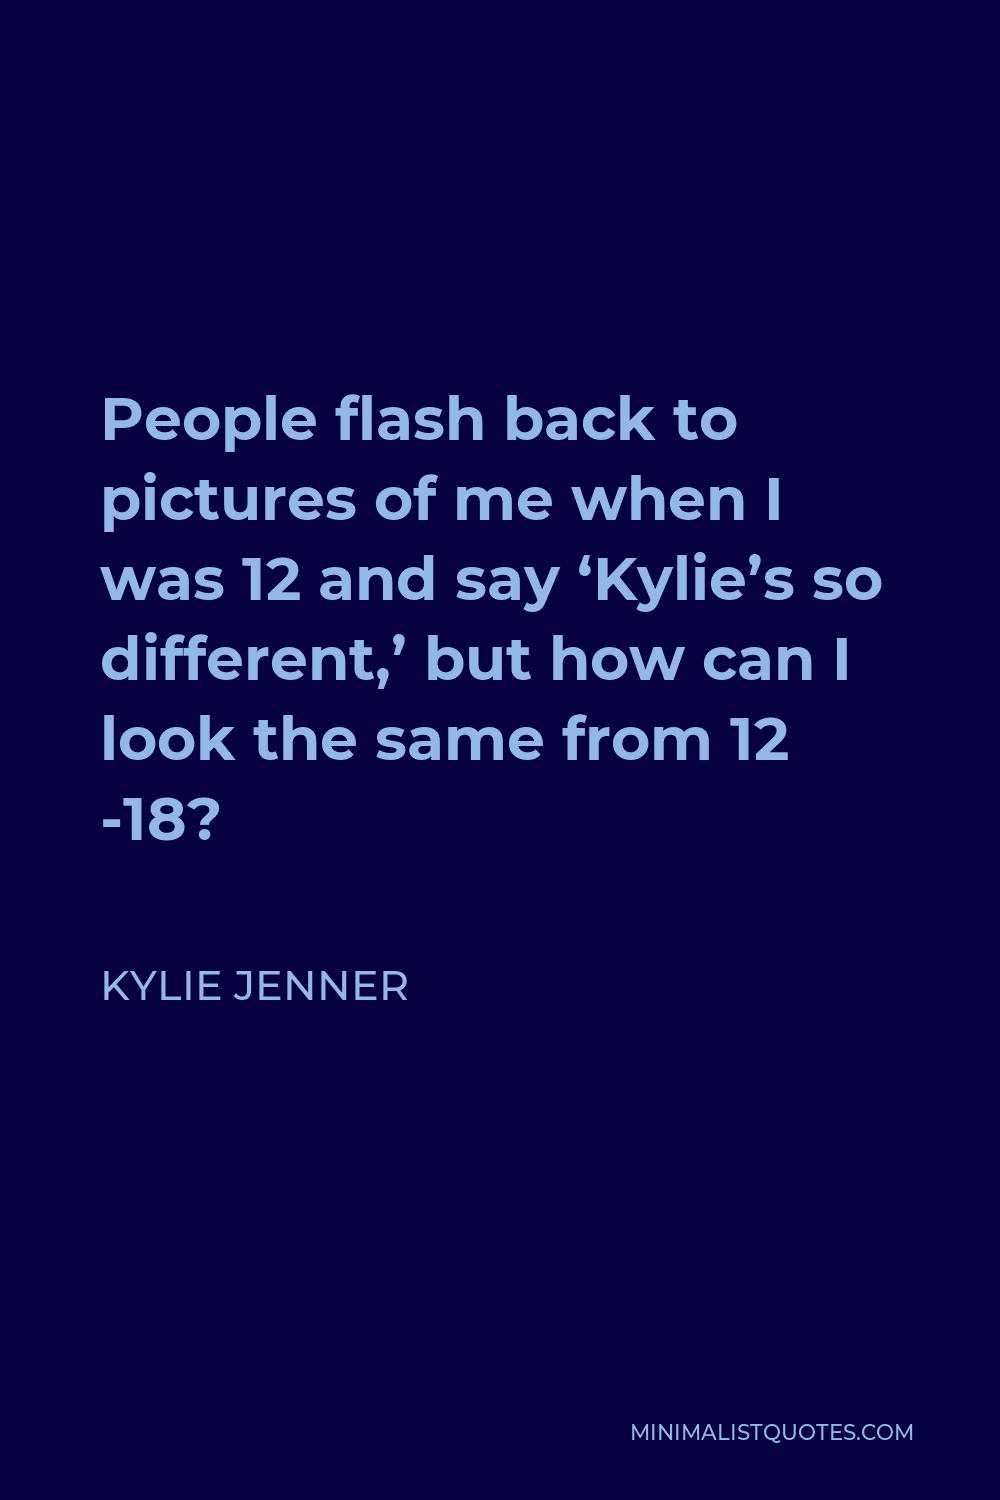 Kylie Jenner Quote - People flash back to pictures of me when I was 12 and say ‘Kylie’s so different,’ but how can I look the same from 12 -18?